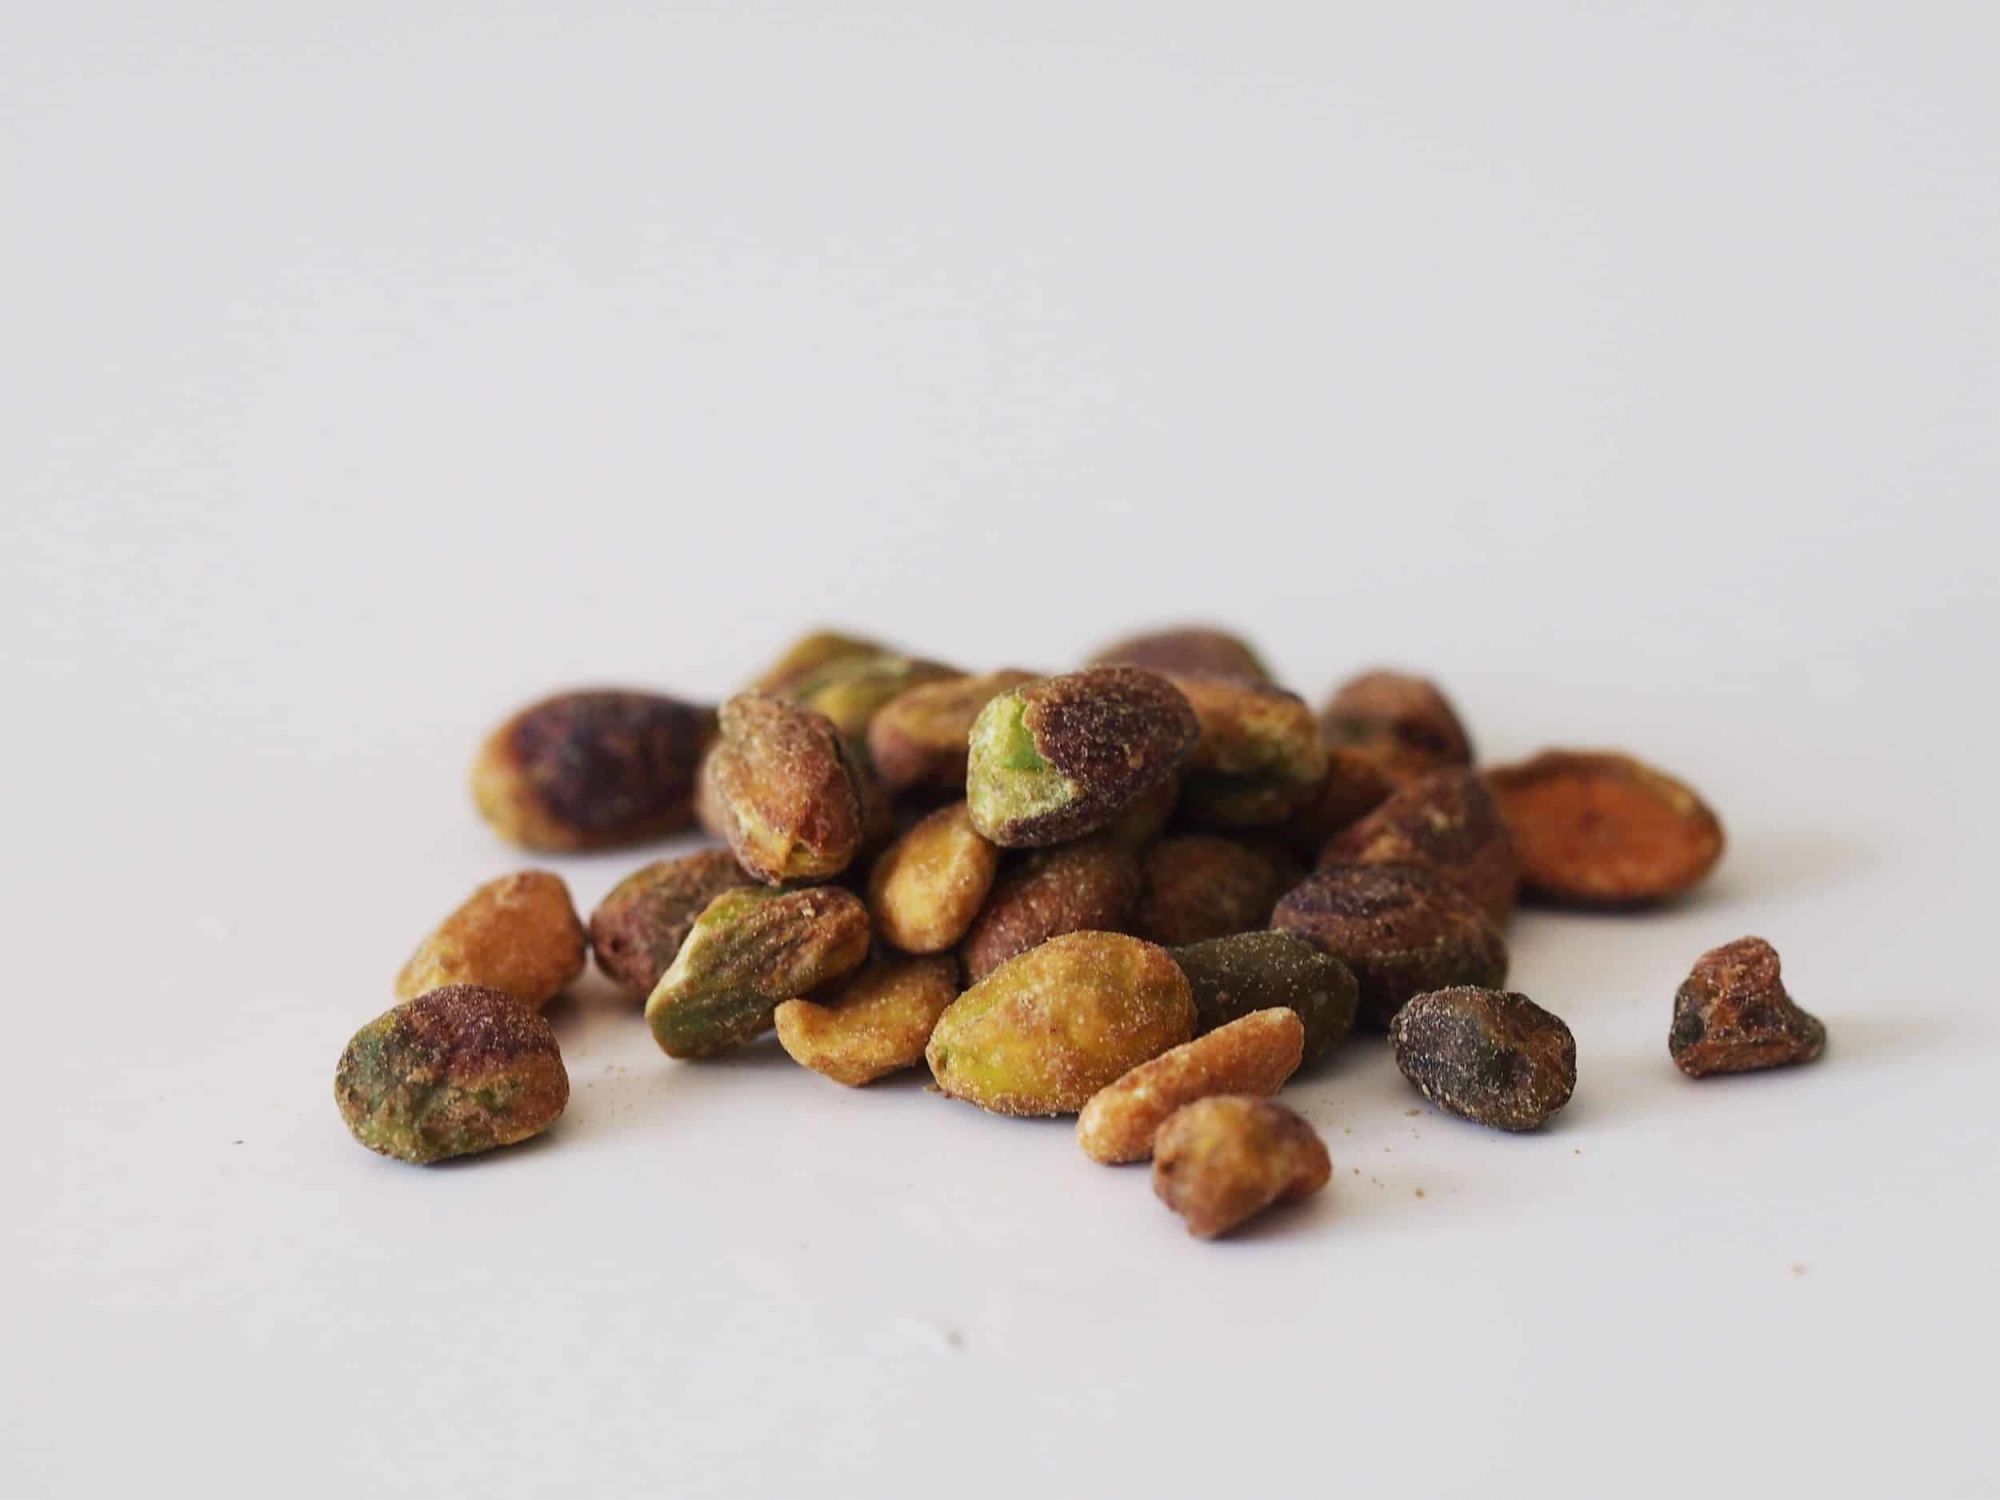 6 Reasons to Make Pistachios Your New Go-To Snack